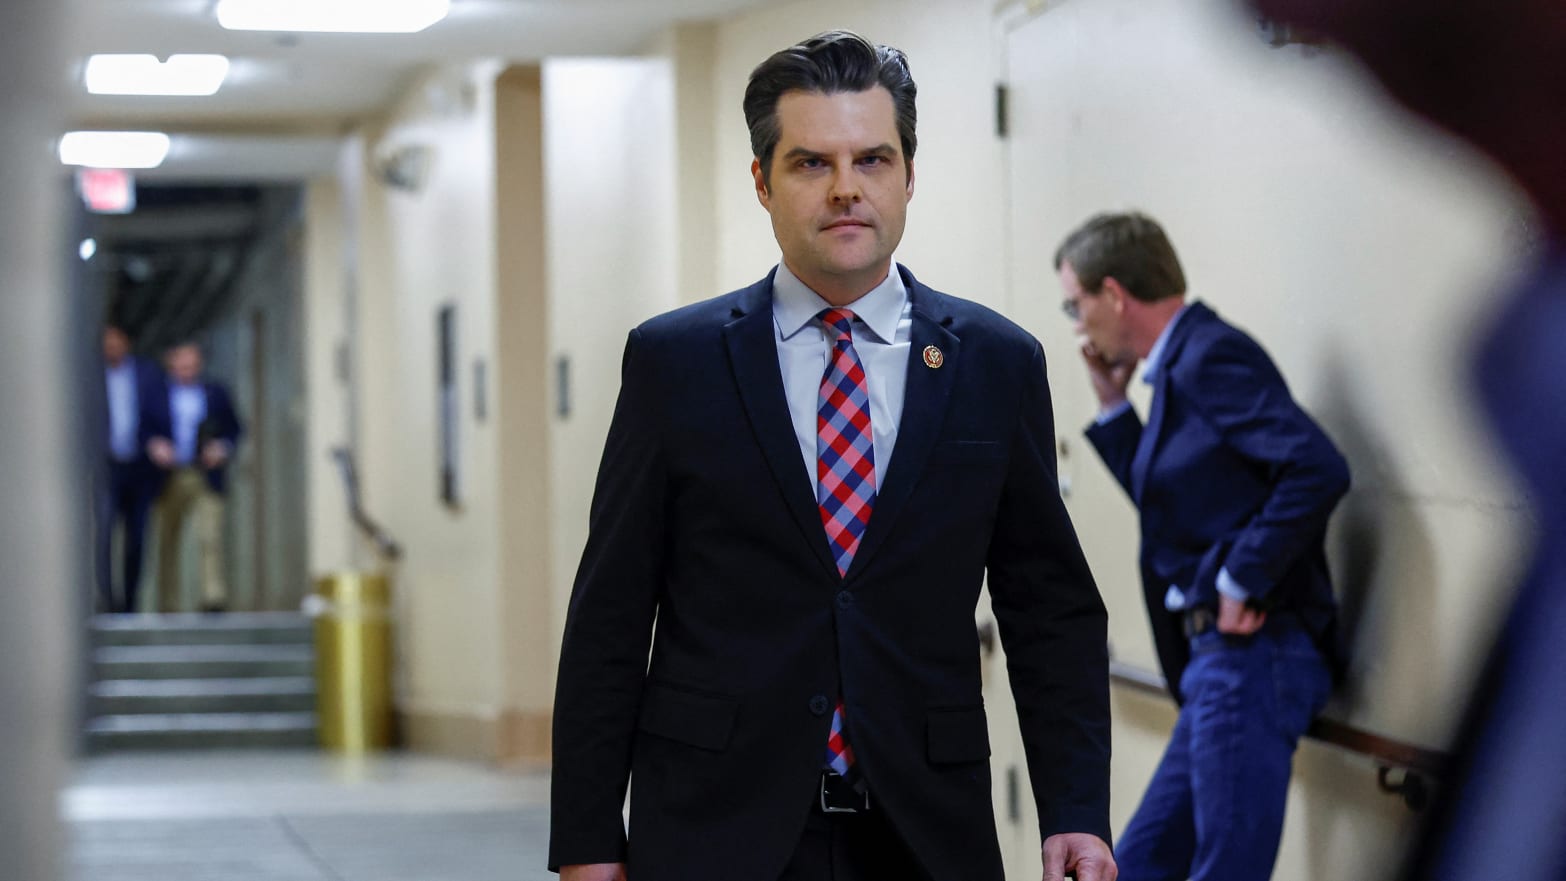 Rep. Matt Gaetz (R-FL) walks to a House Republican Conference meeting as Republicans work towards electing a new Speaker of the House